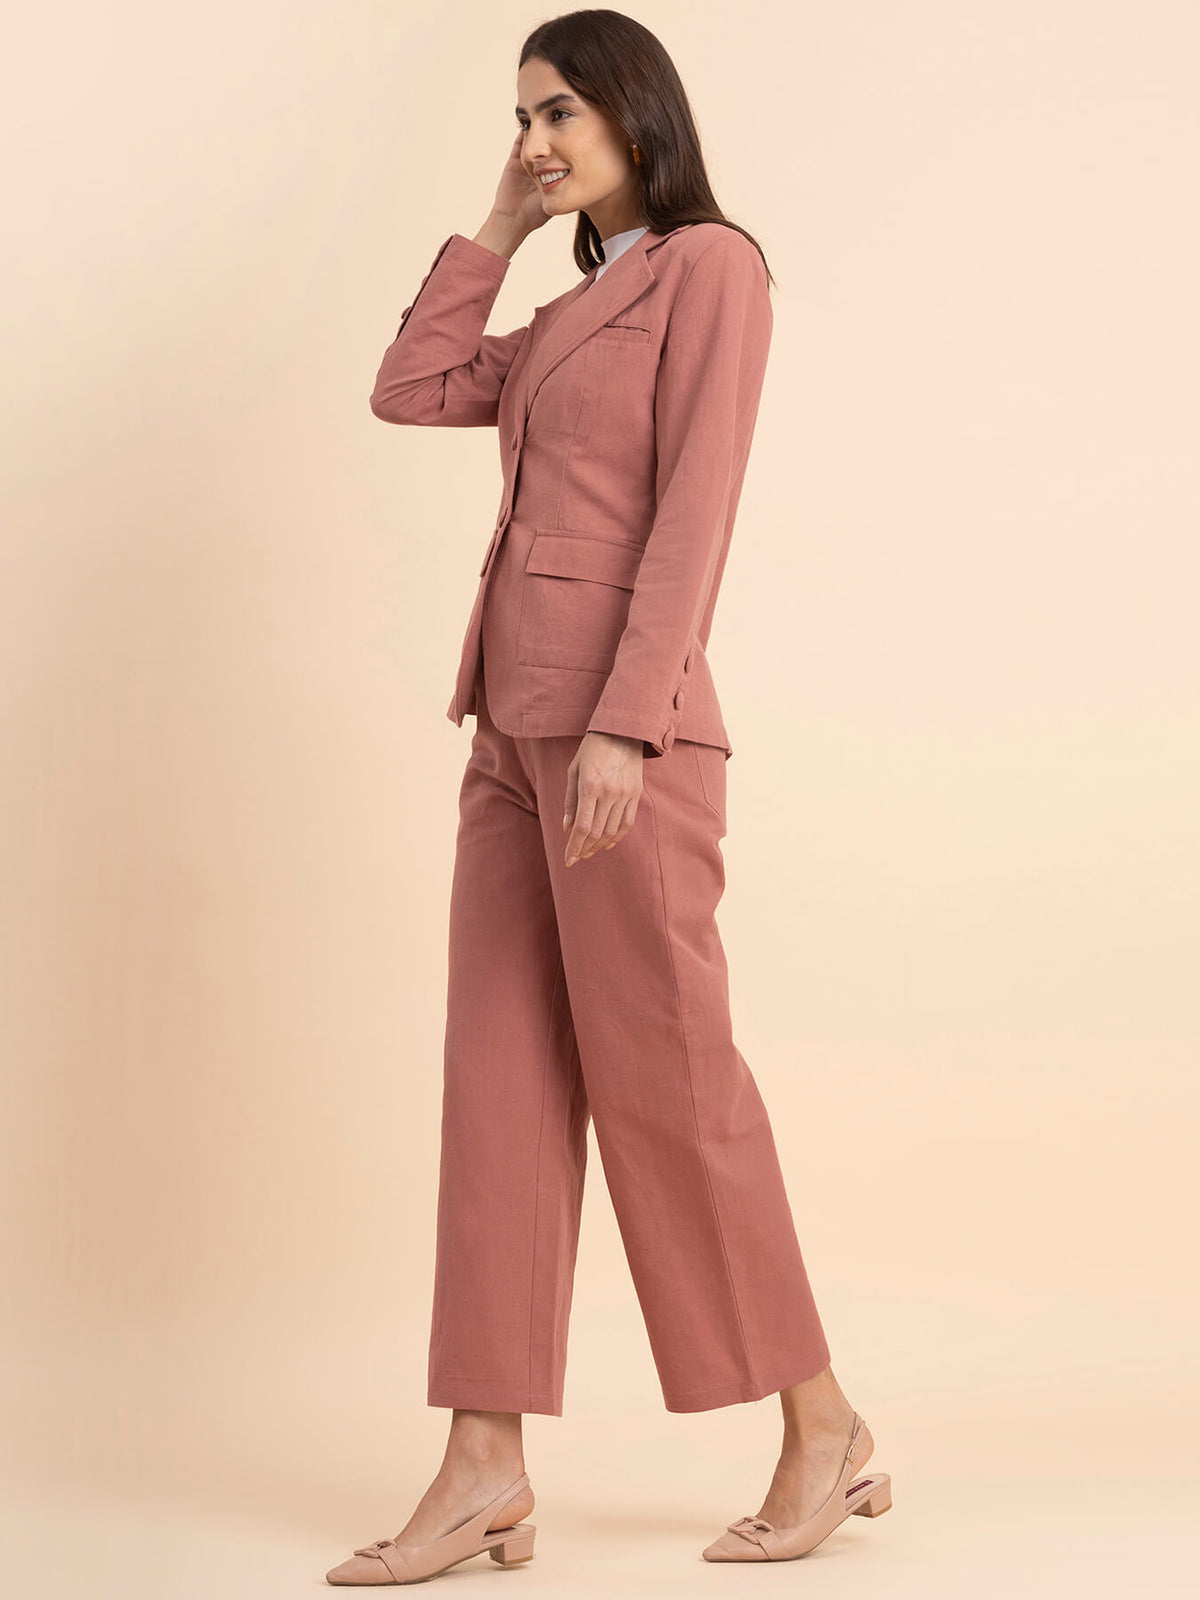 Linen Blazer and Trousers Co-ord - Dusty Pink